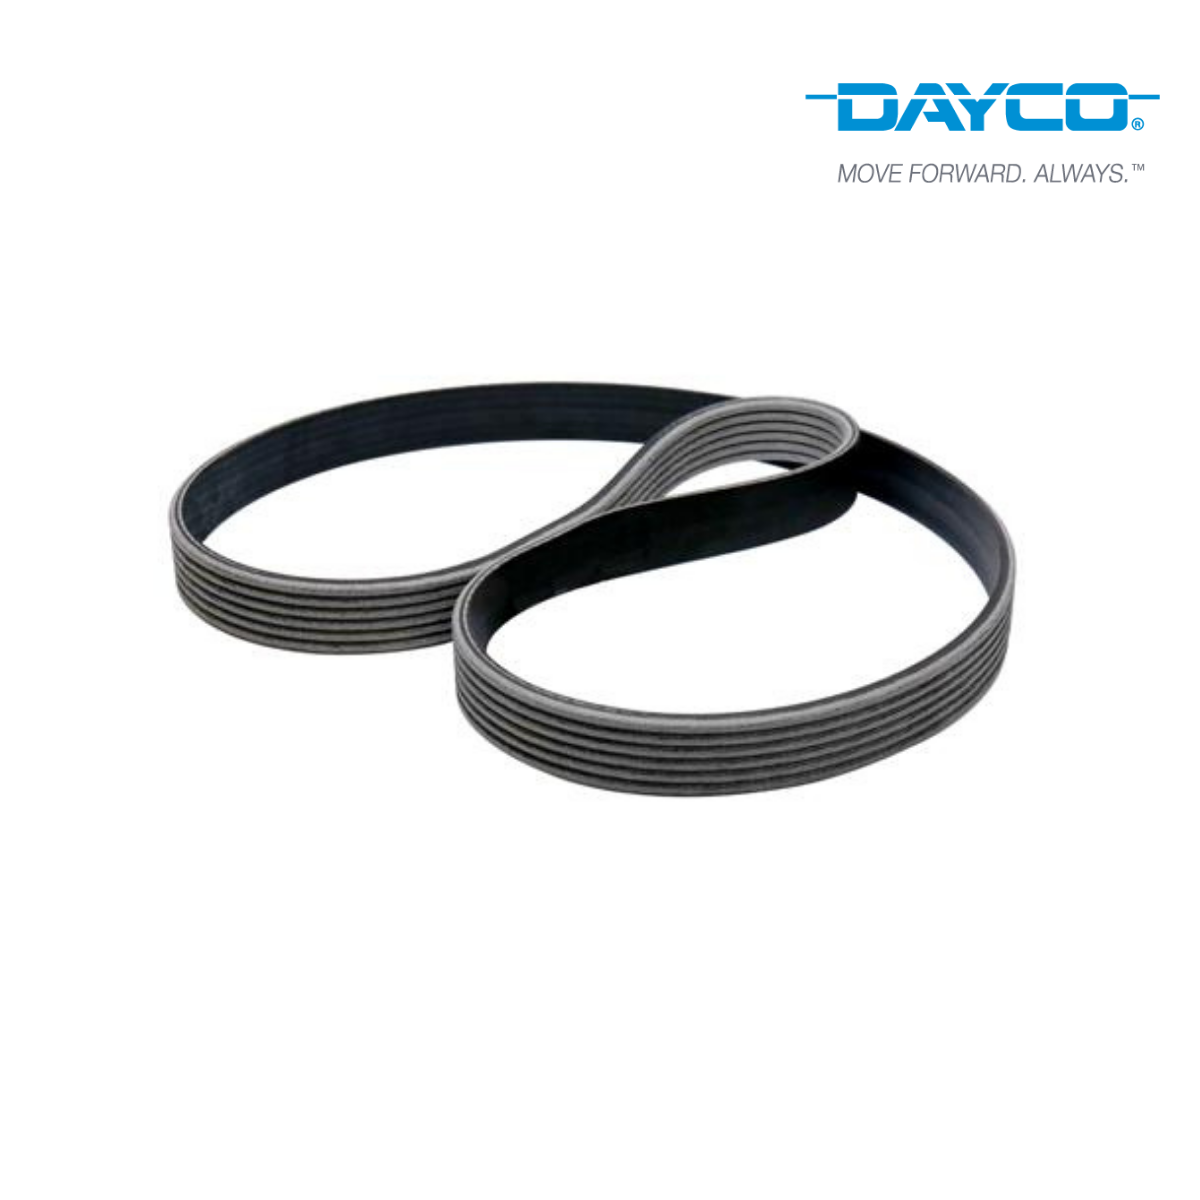 Find The Parts With Dayco